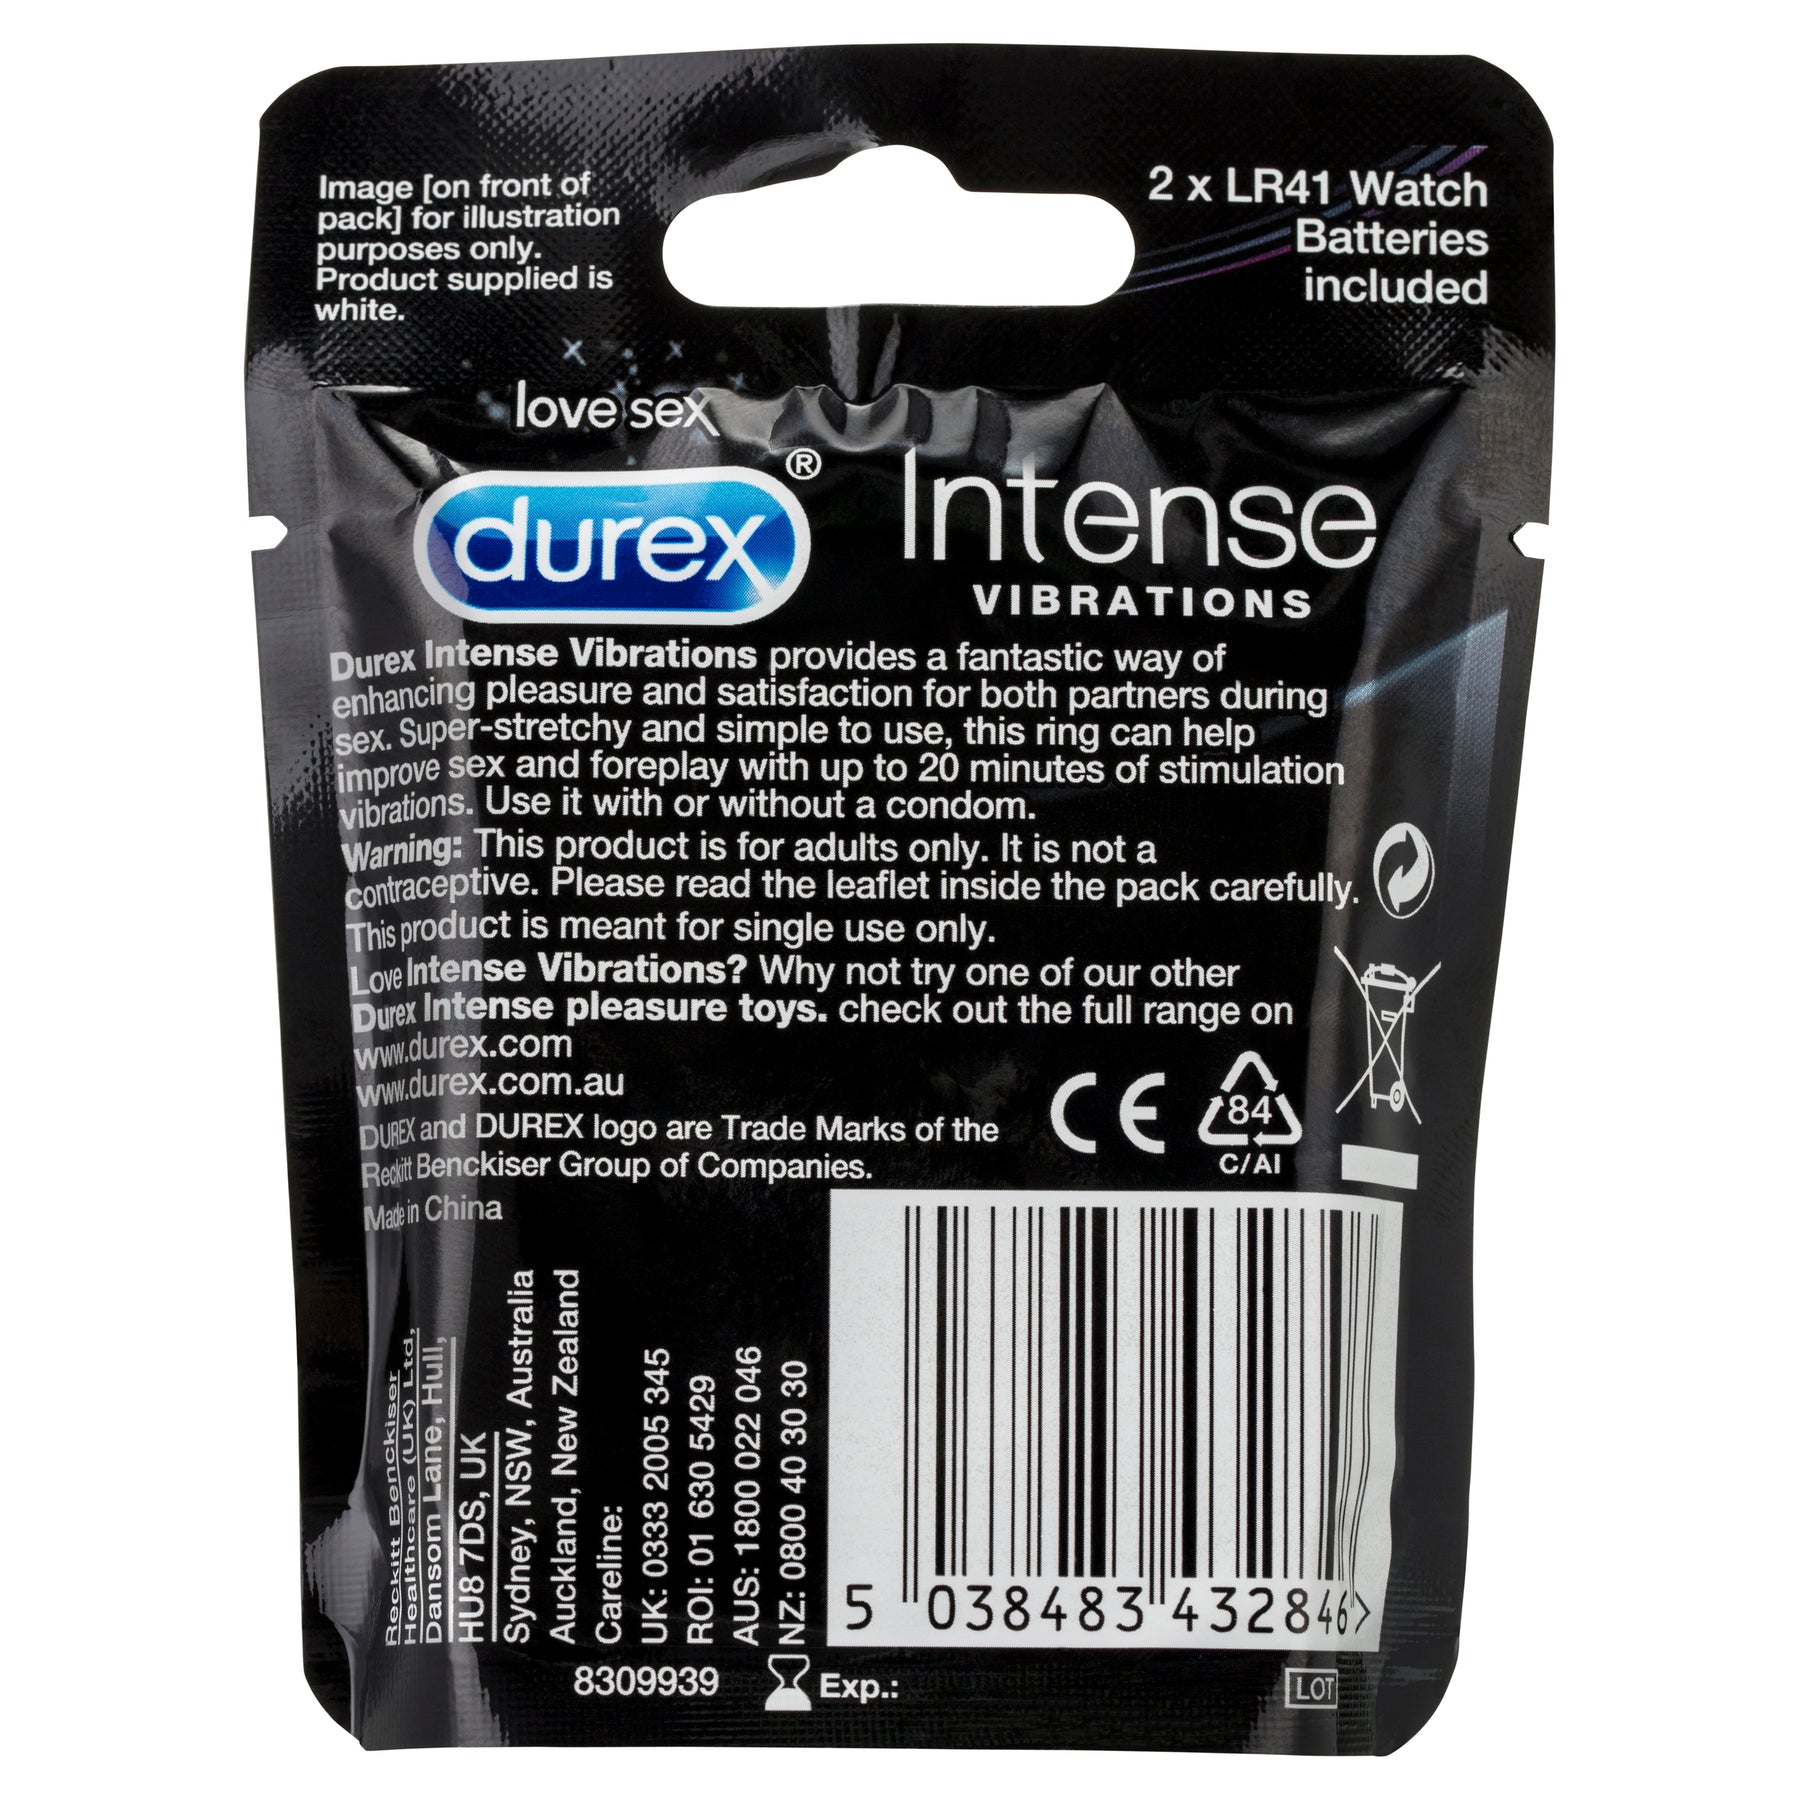 Durex Intense Vibrating Ring Sex Toy : Amazon.co.uk: Health & Personal Care